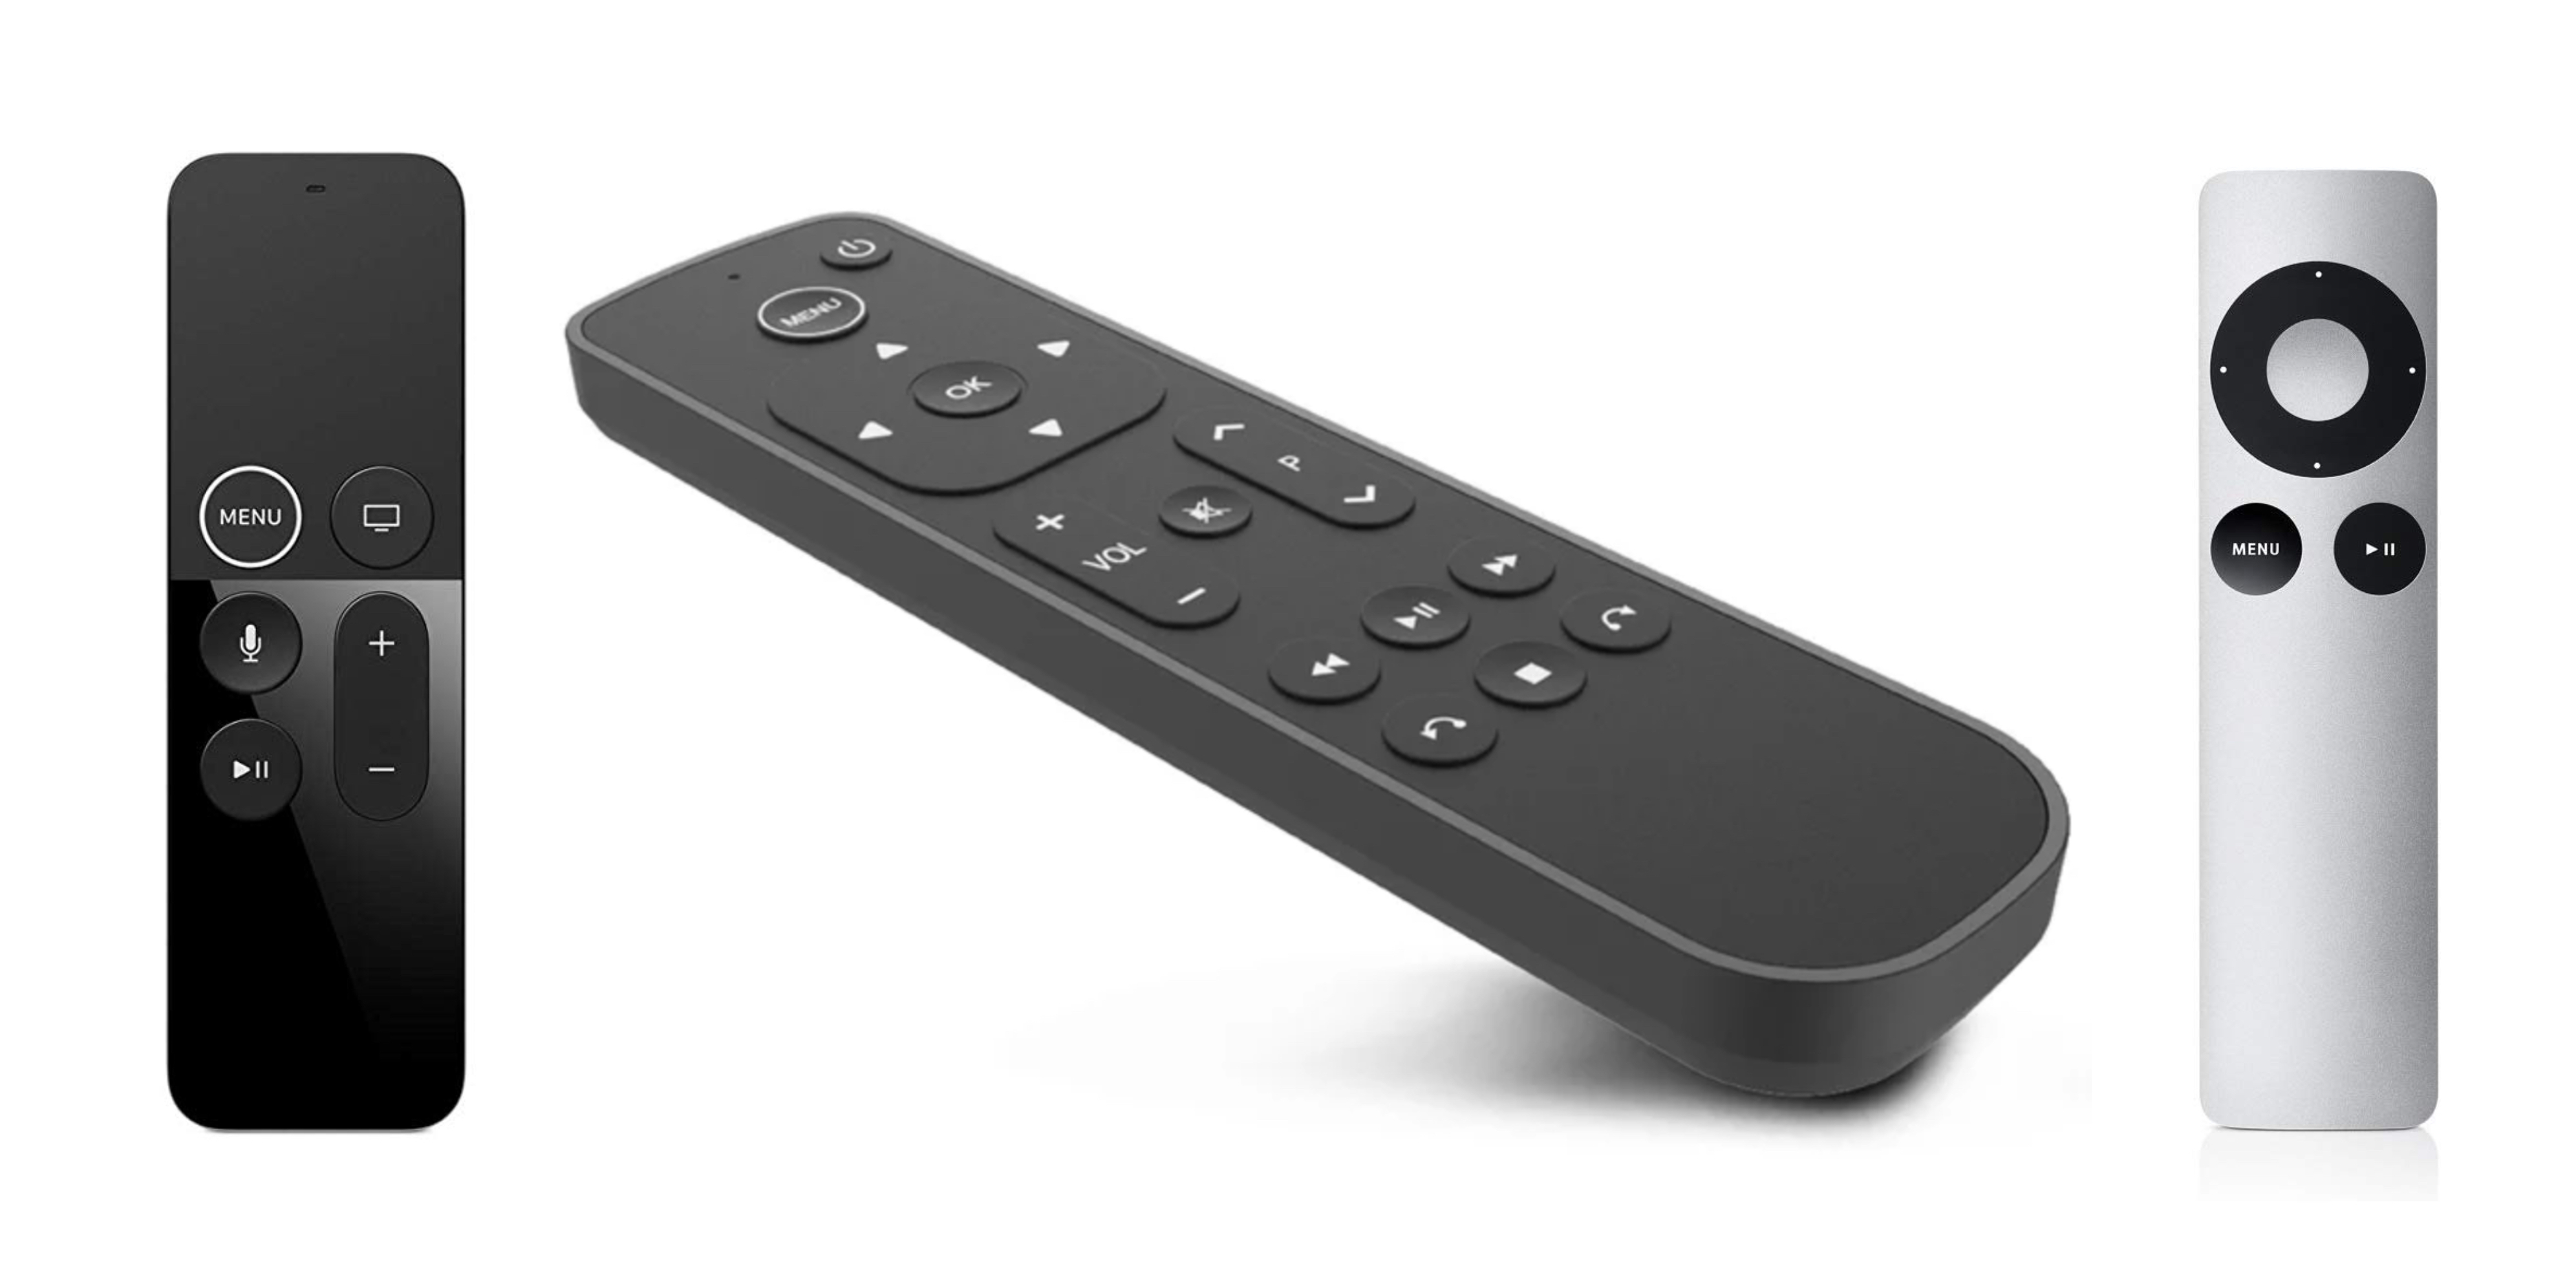 Swiss Cable Company Offering Alternative Remote To Control Apple Tv Like Apple S Own Ir Remote 9to5mac